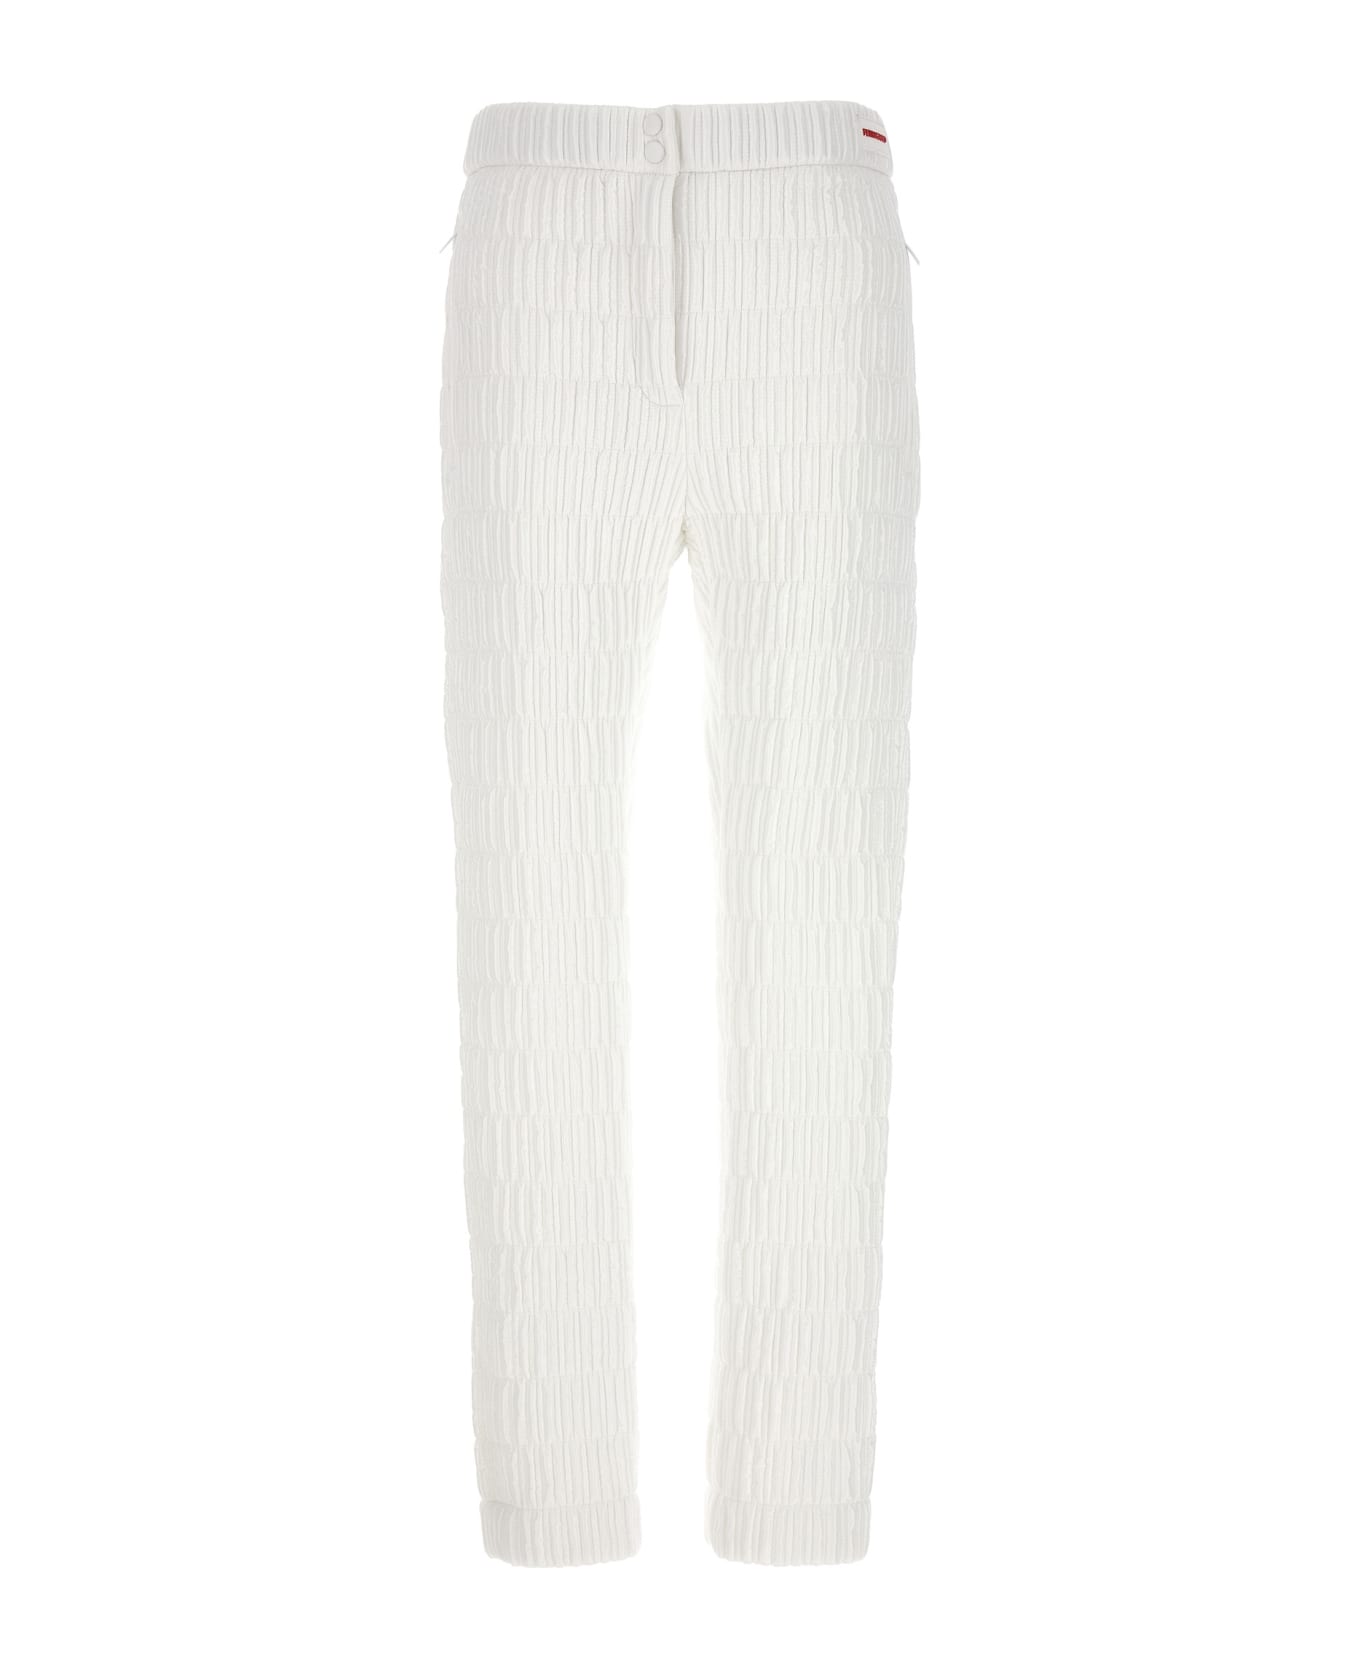 Ferragamo Quilted Pants - White